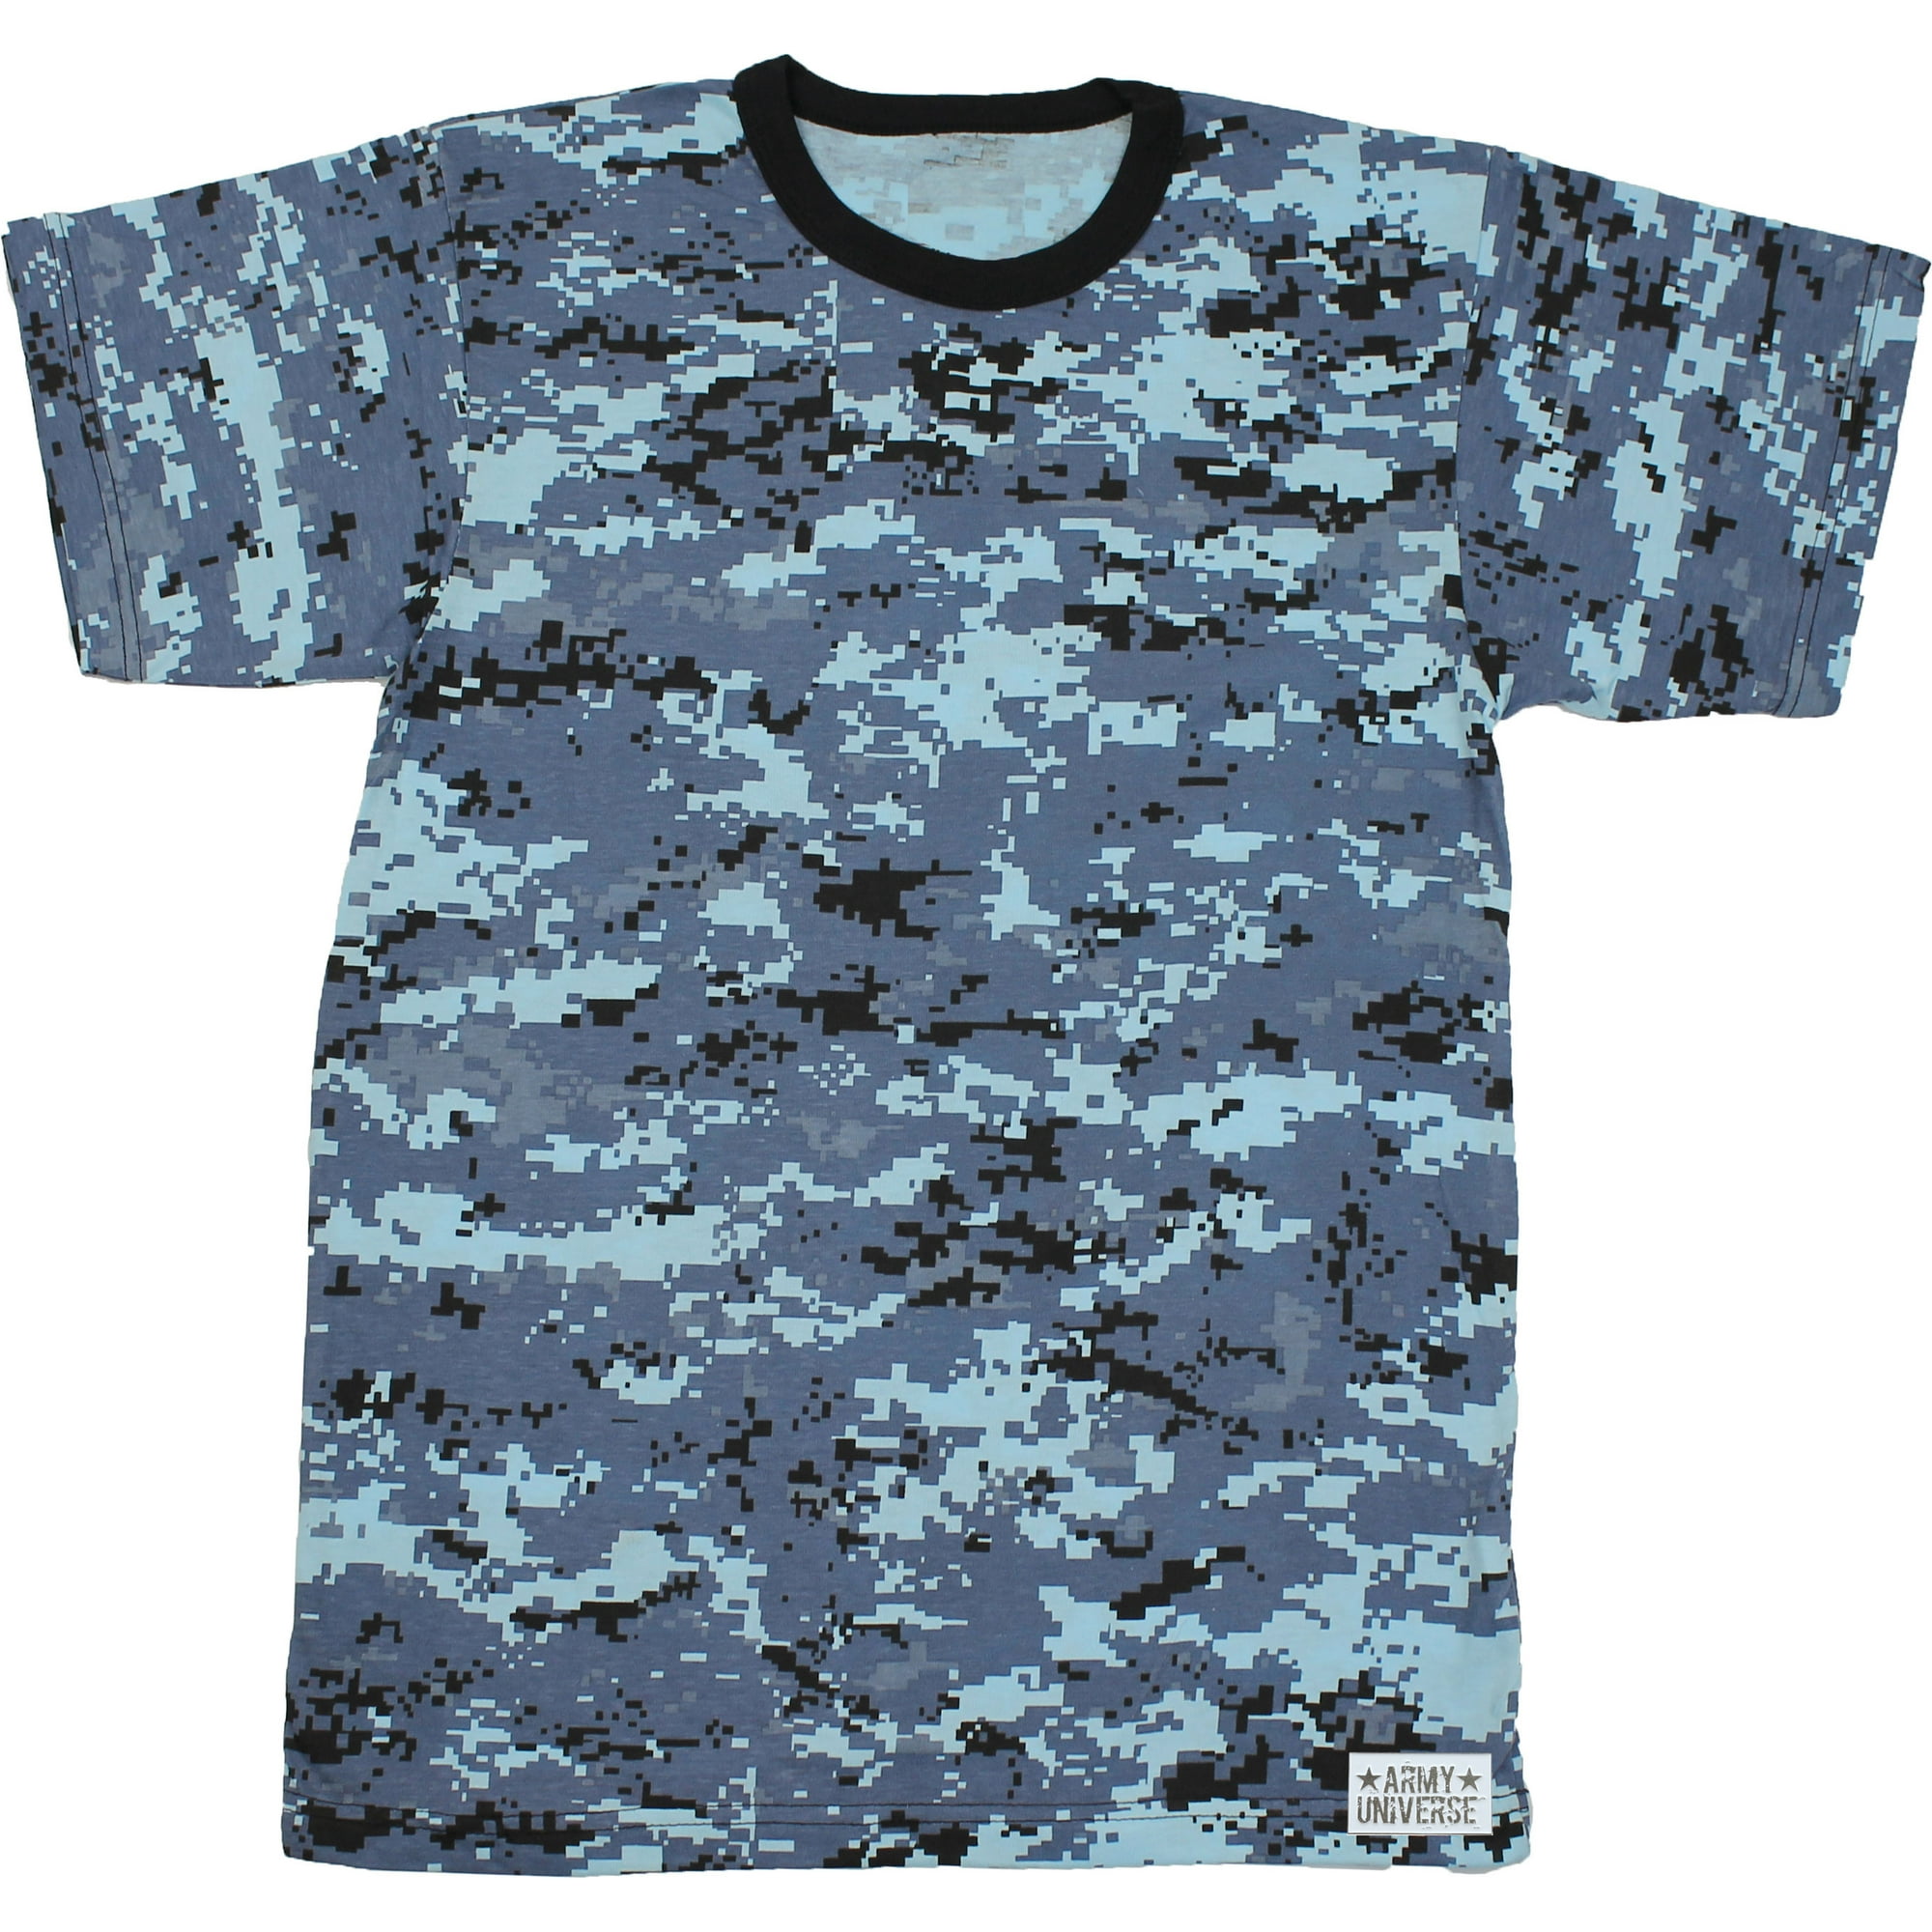 Sky Blue Digital Camouflage Short Sleeve T-Shirt with ARMY UNIVERSE Pin -  Size Small (33-37) 